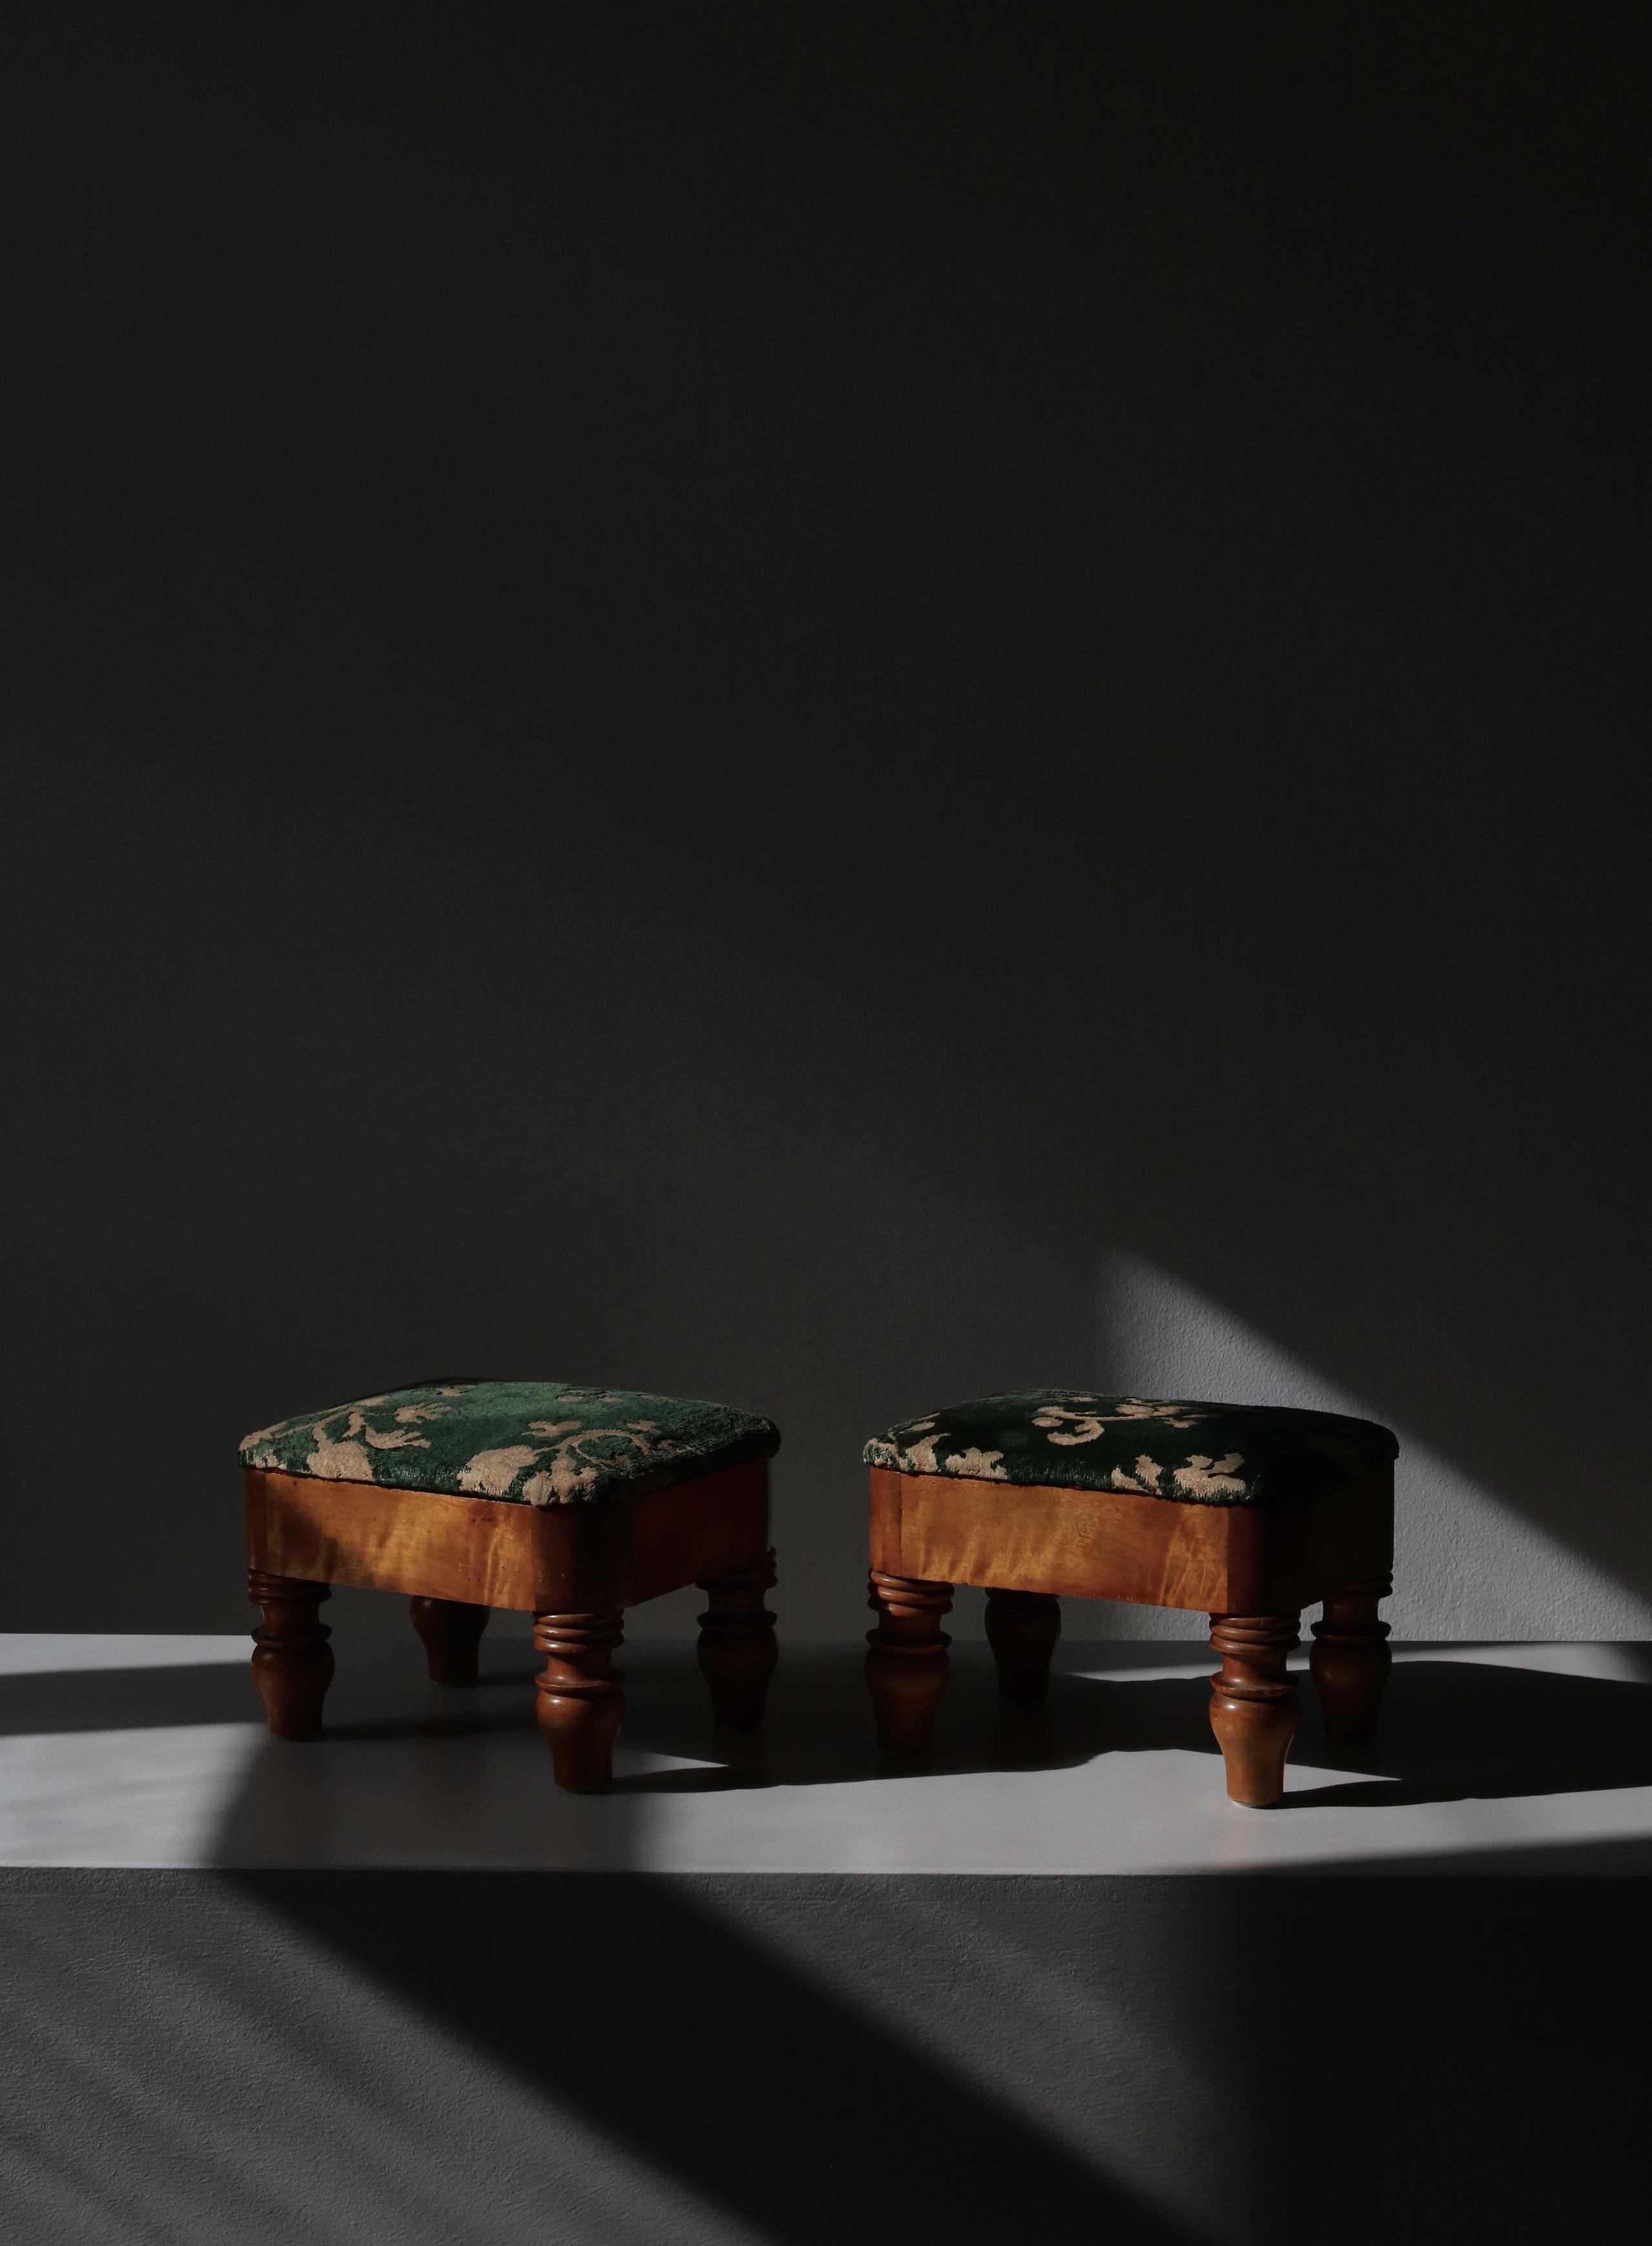 A pair of small charming footstools made by a Swedish cabinetmaker in the early 20th century. The stools are made from Scandinavian birch tree with a beautiful patina. Upholstered in green and white velvet.